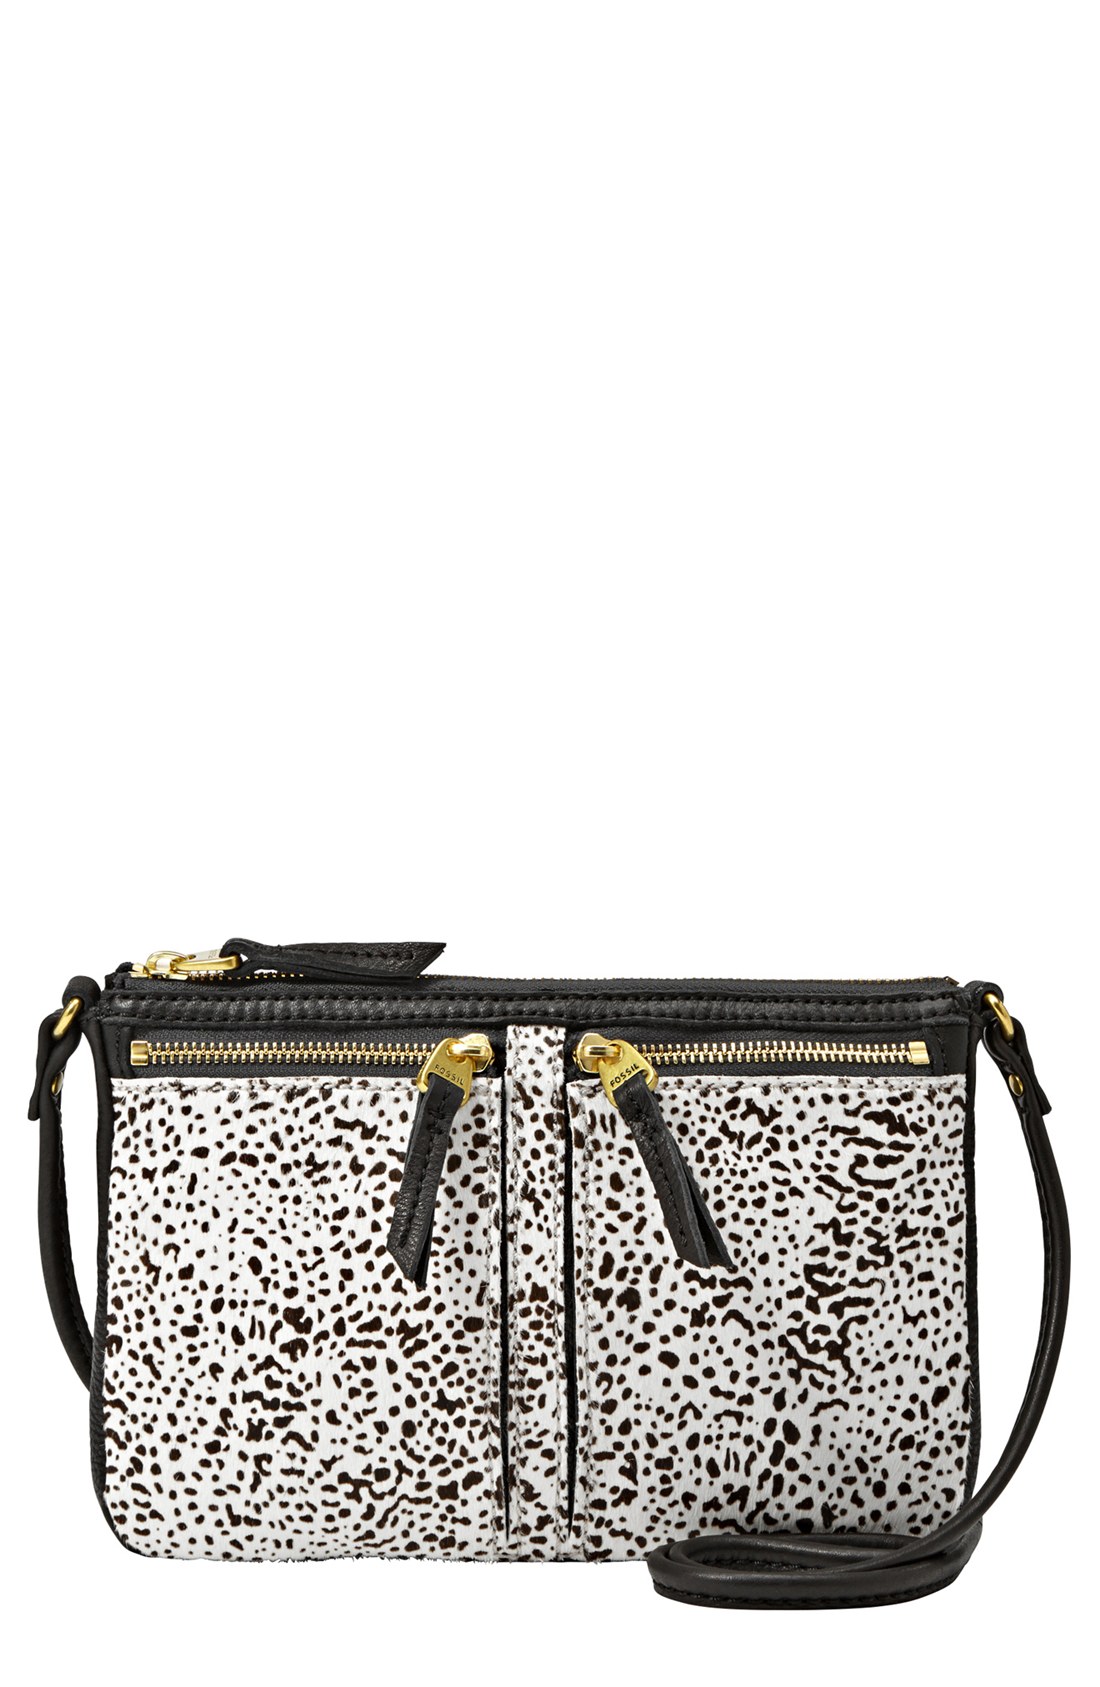 Fossil Erin Small Crossbody Bag in White (Black/whit) | Lyst